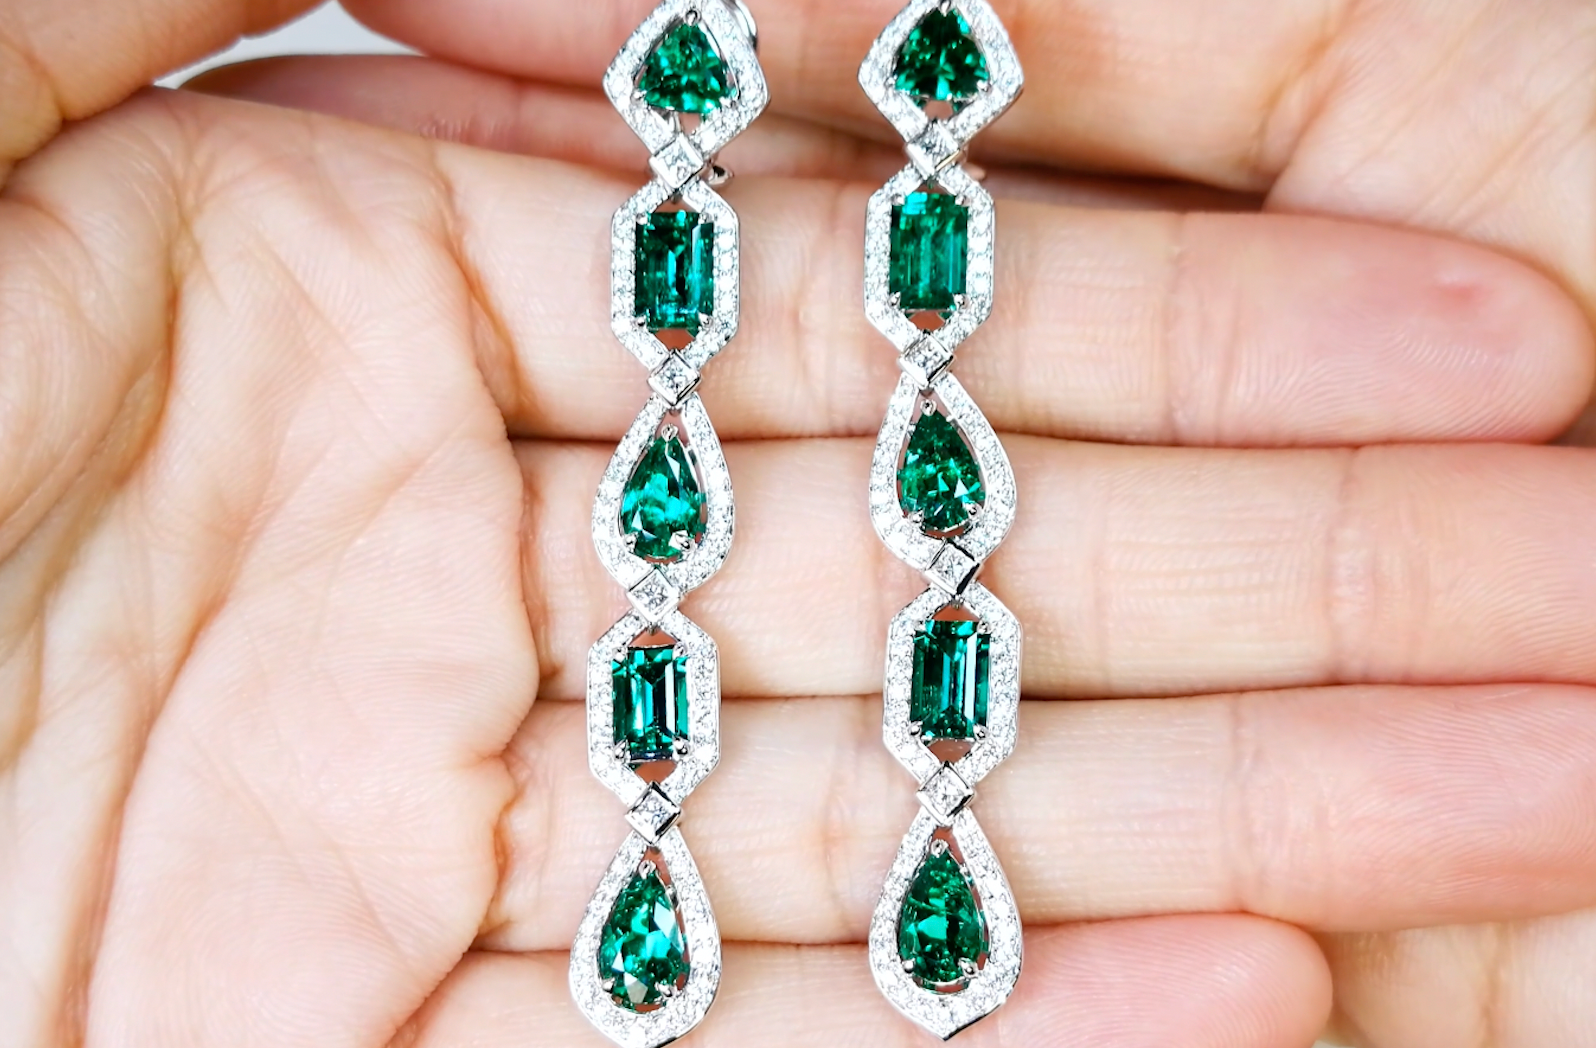 5.53ct Old World Muzo Colombian Emerald Earrings with D Flawless Diamonds set in 18K White Gold